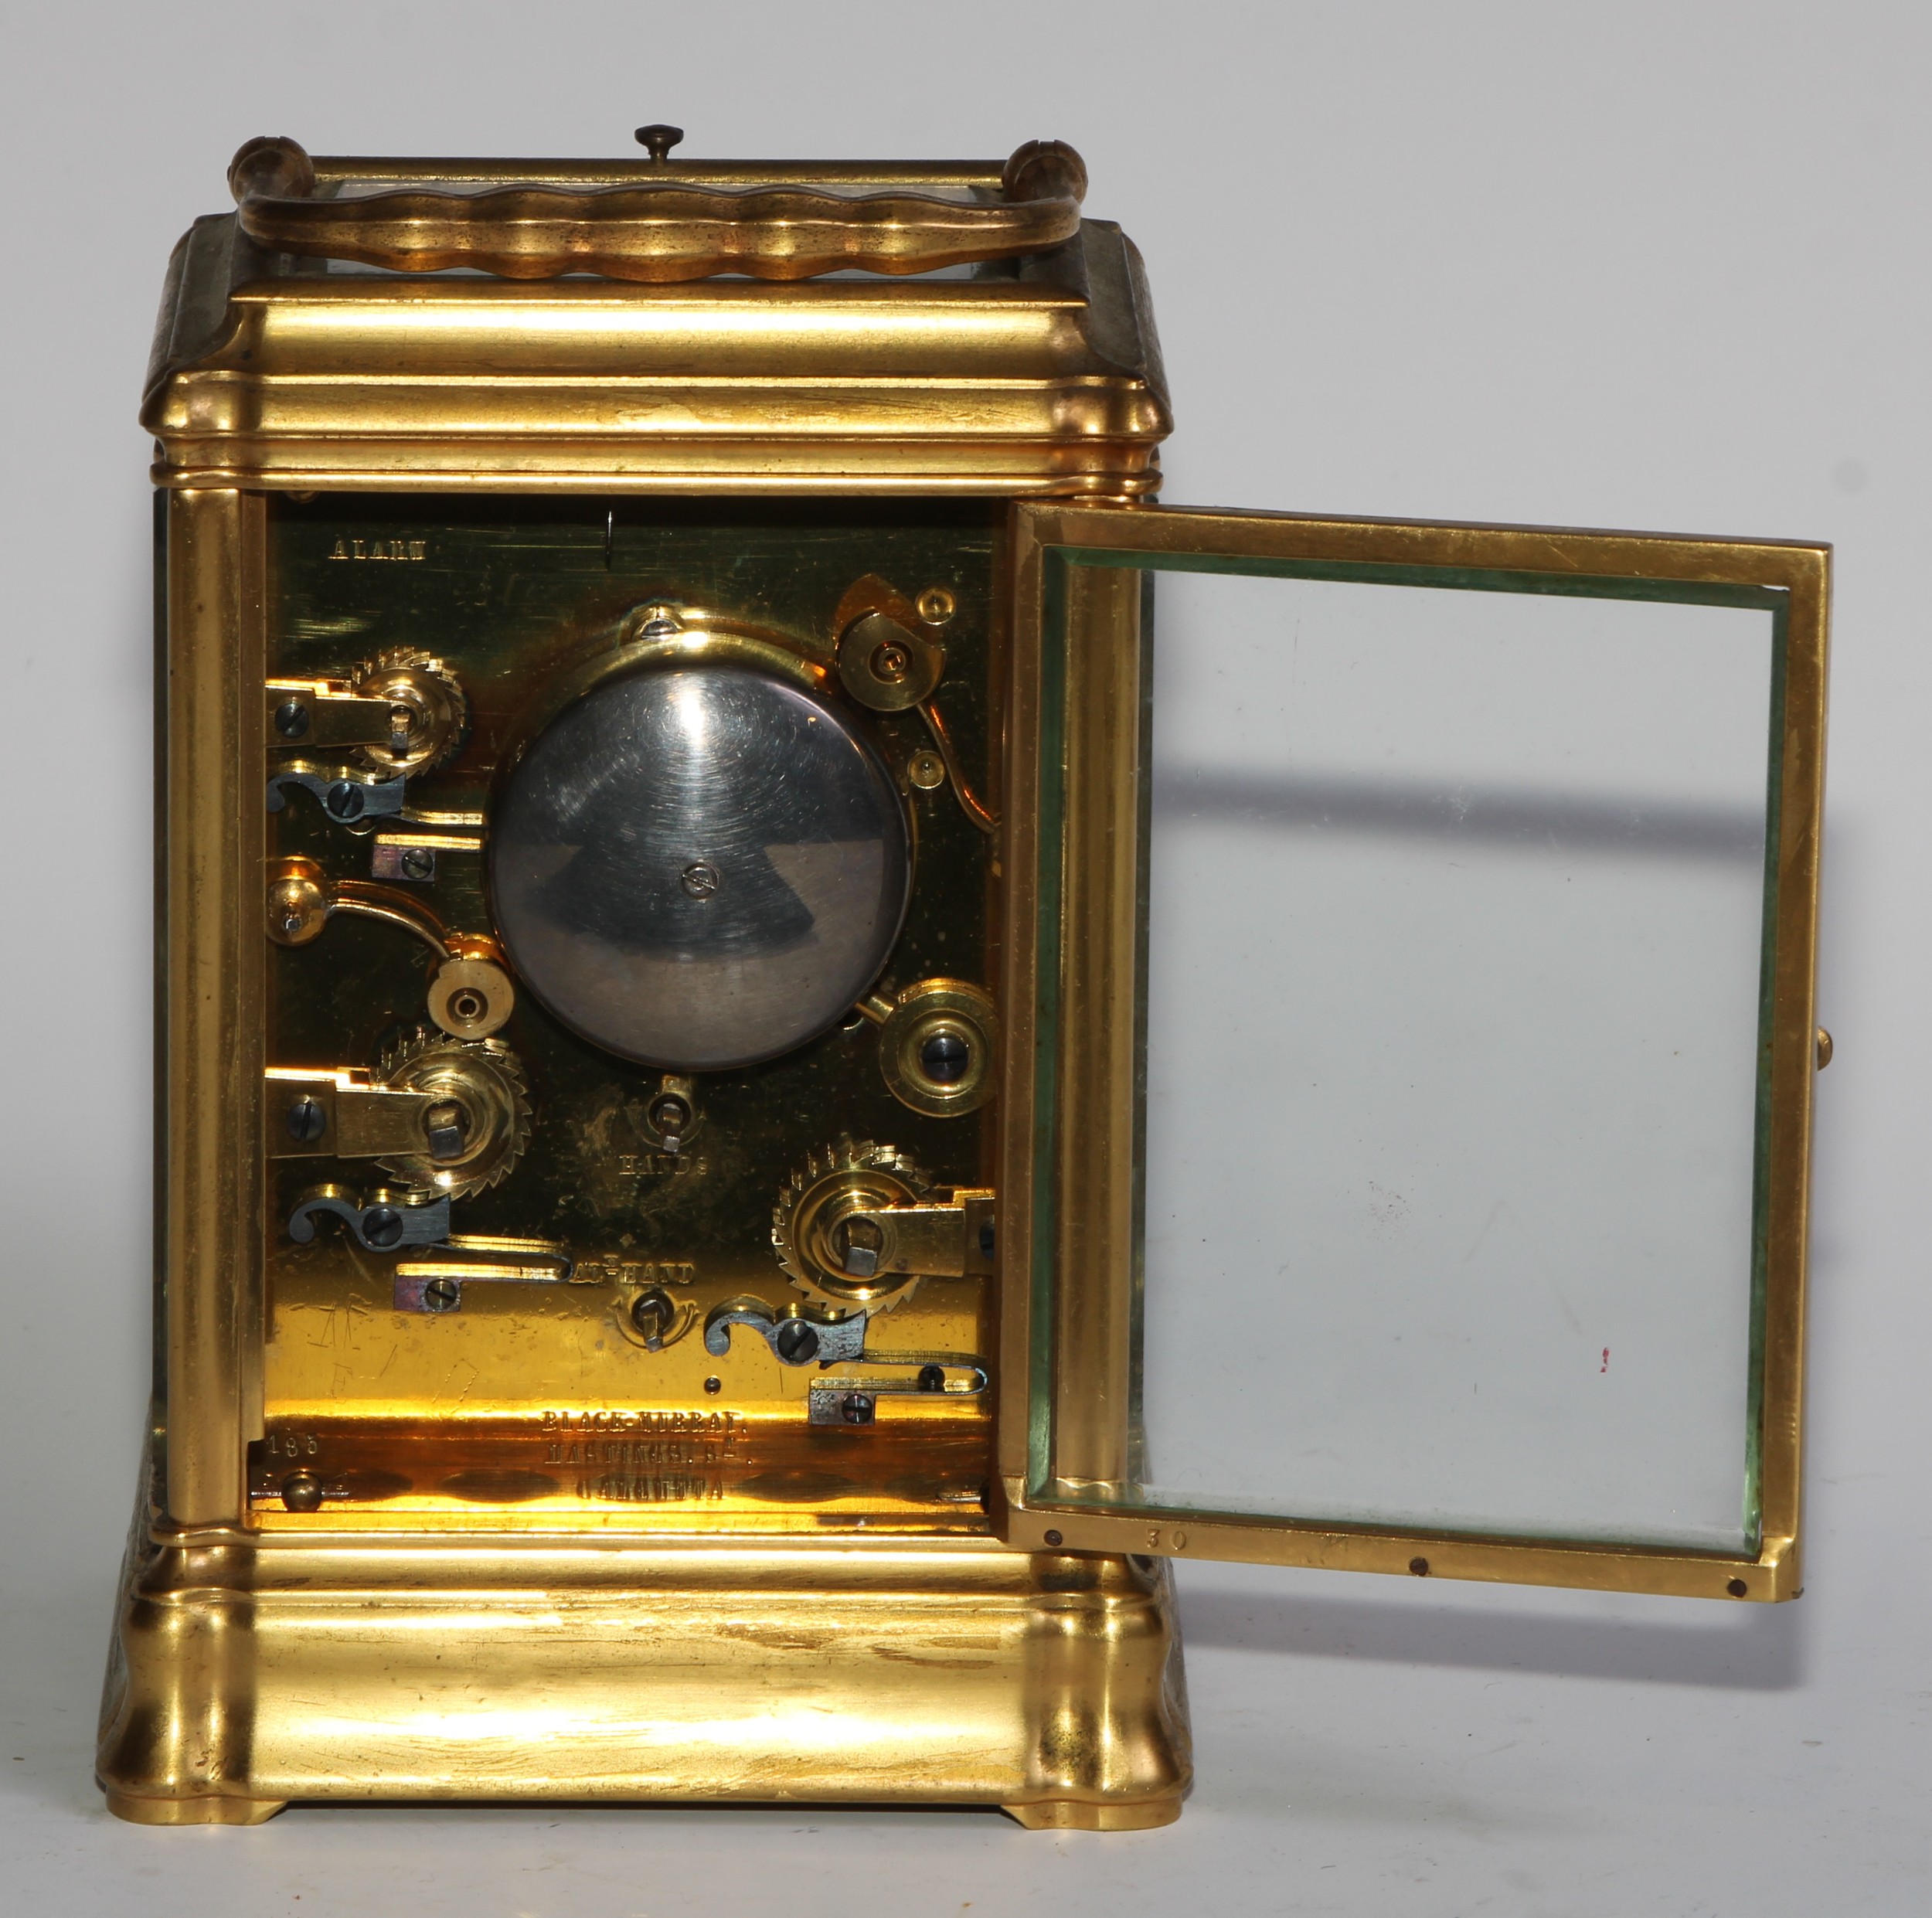 A 19th century Anglo-Indian gilt brass repeater carriage clock, 7cm rectangular enamel dial with - Image 7 of 8